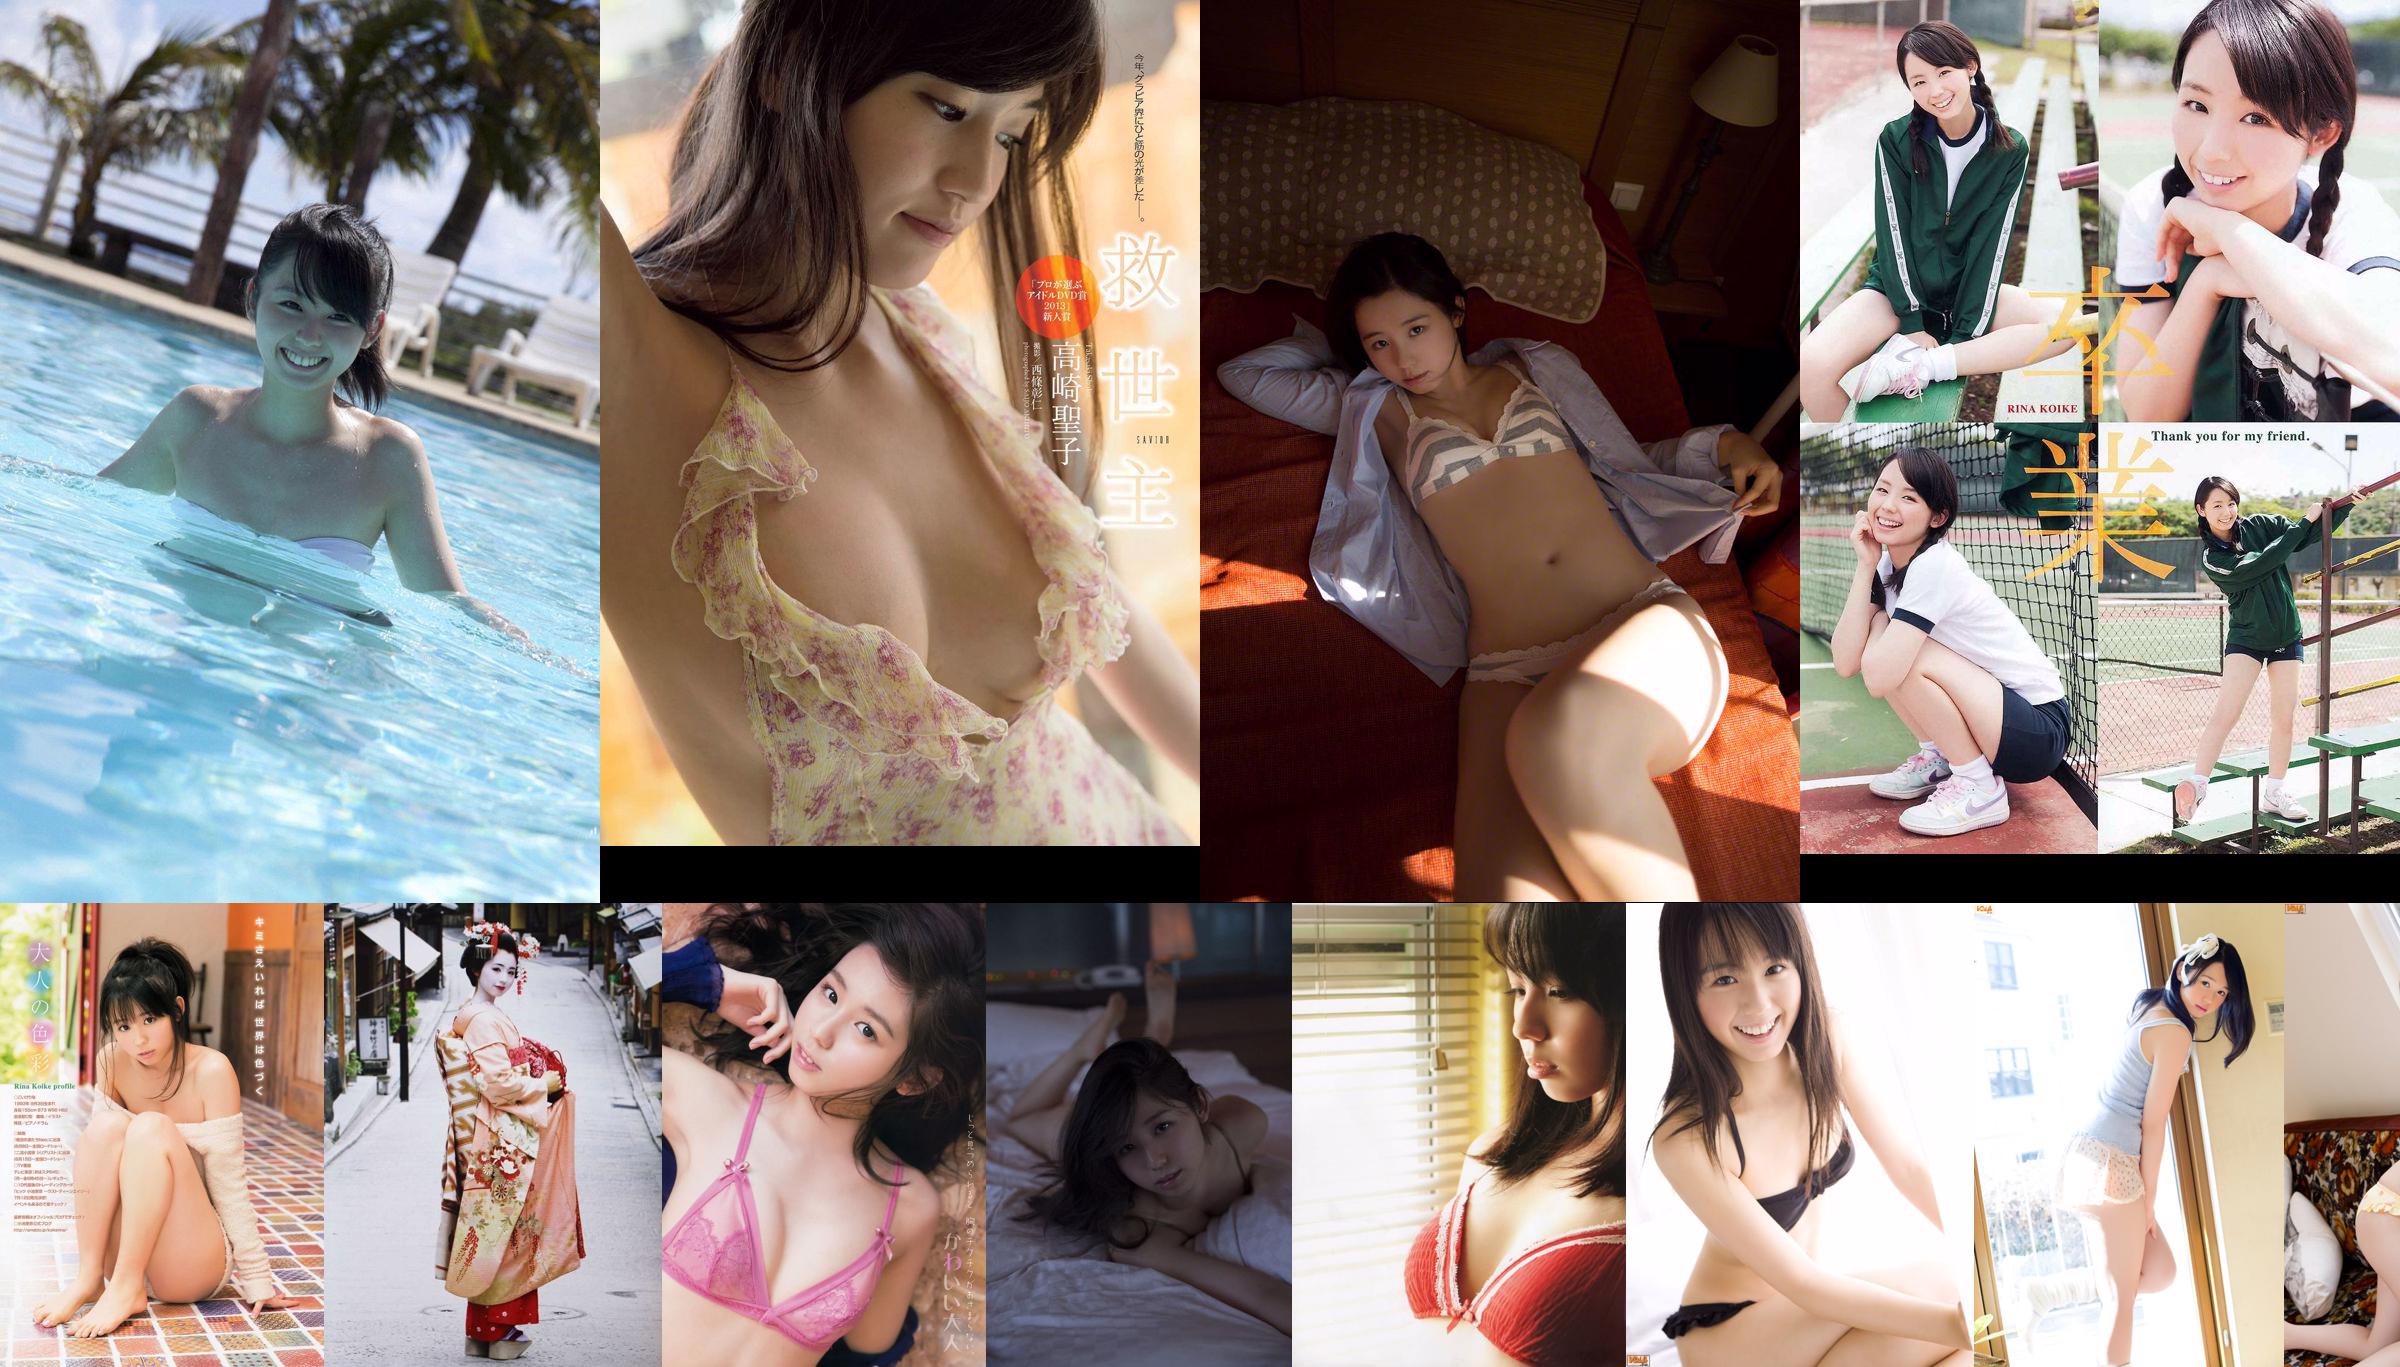 Rina Koike "After Class ヒロイン" [YS Web] Vol.352 No.518629 Page 1